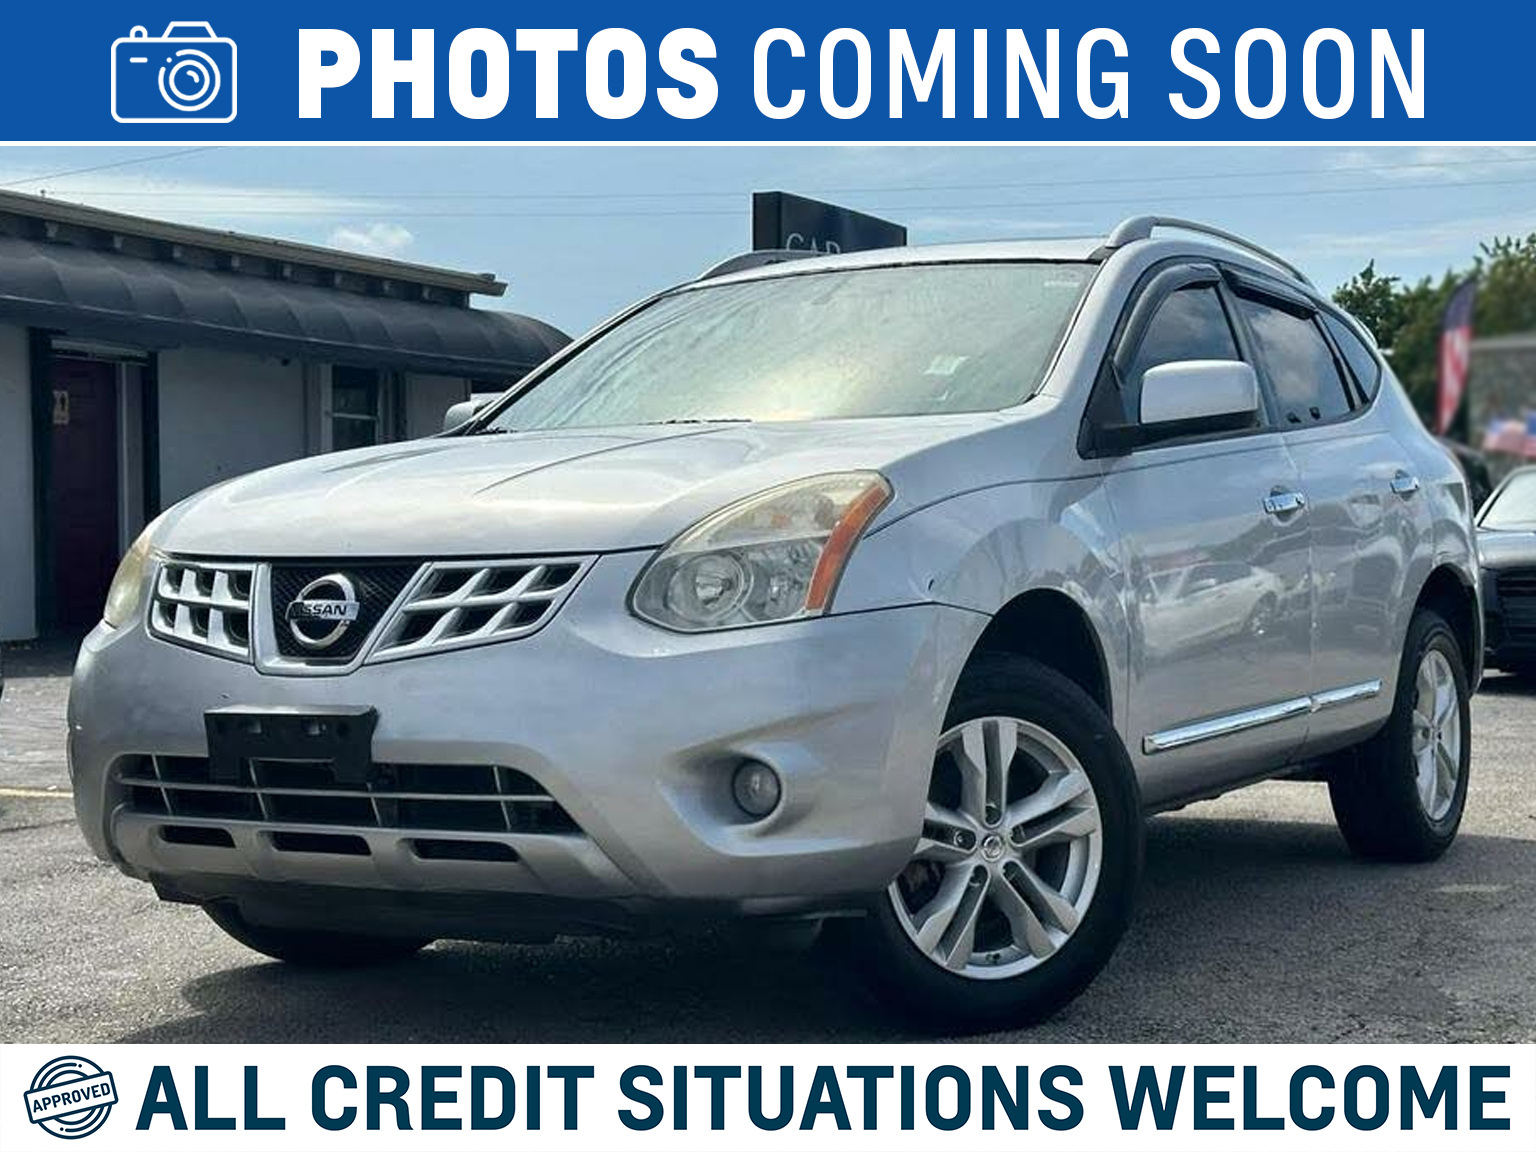 2012 Nissan Rogue AWD, LEATHER, ROOF, BACK UP CAMERA. ONLY 54,000KMS